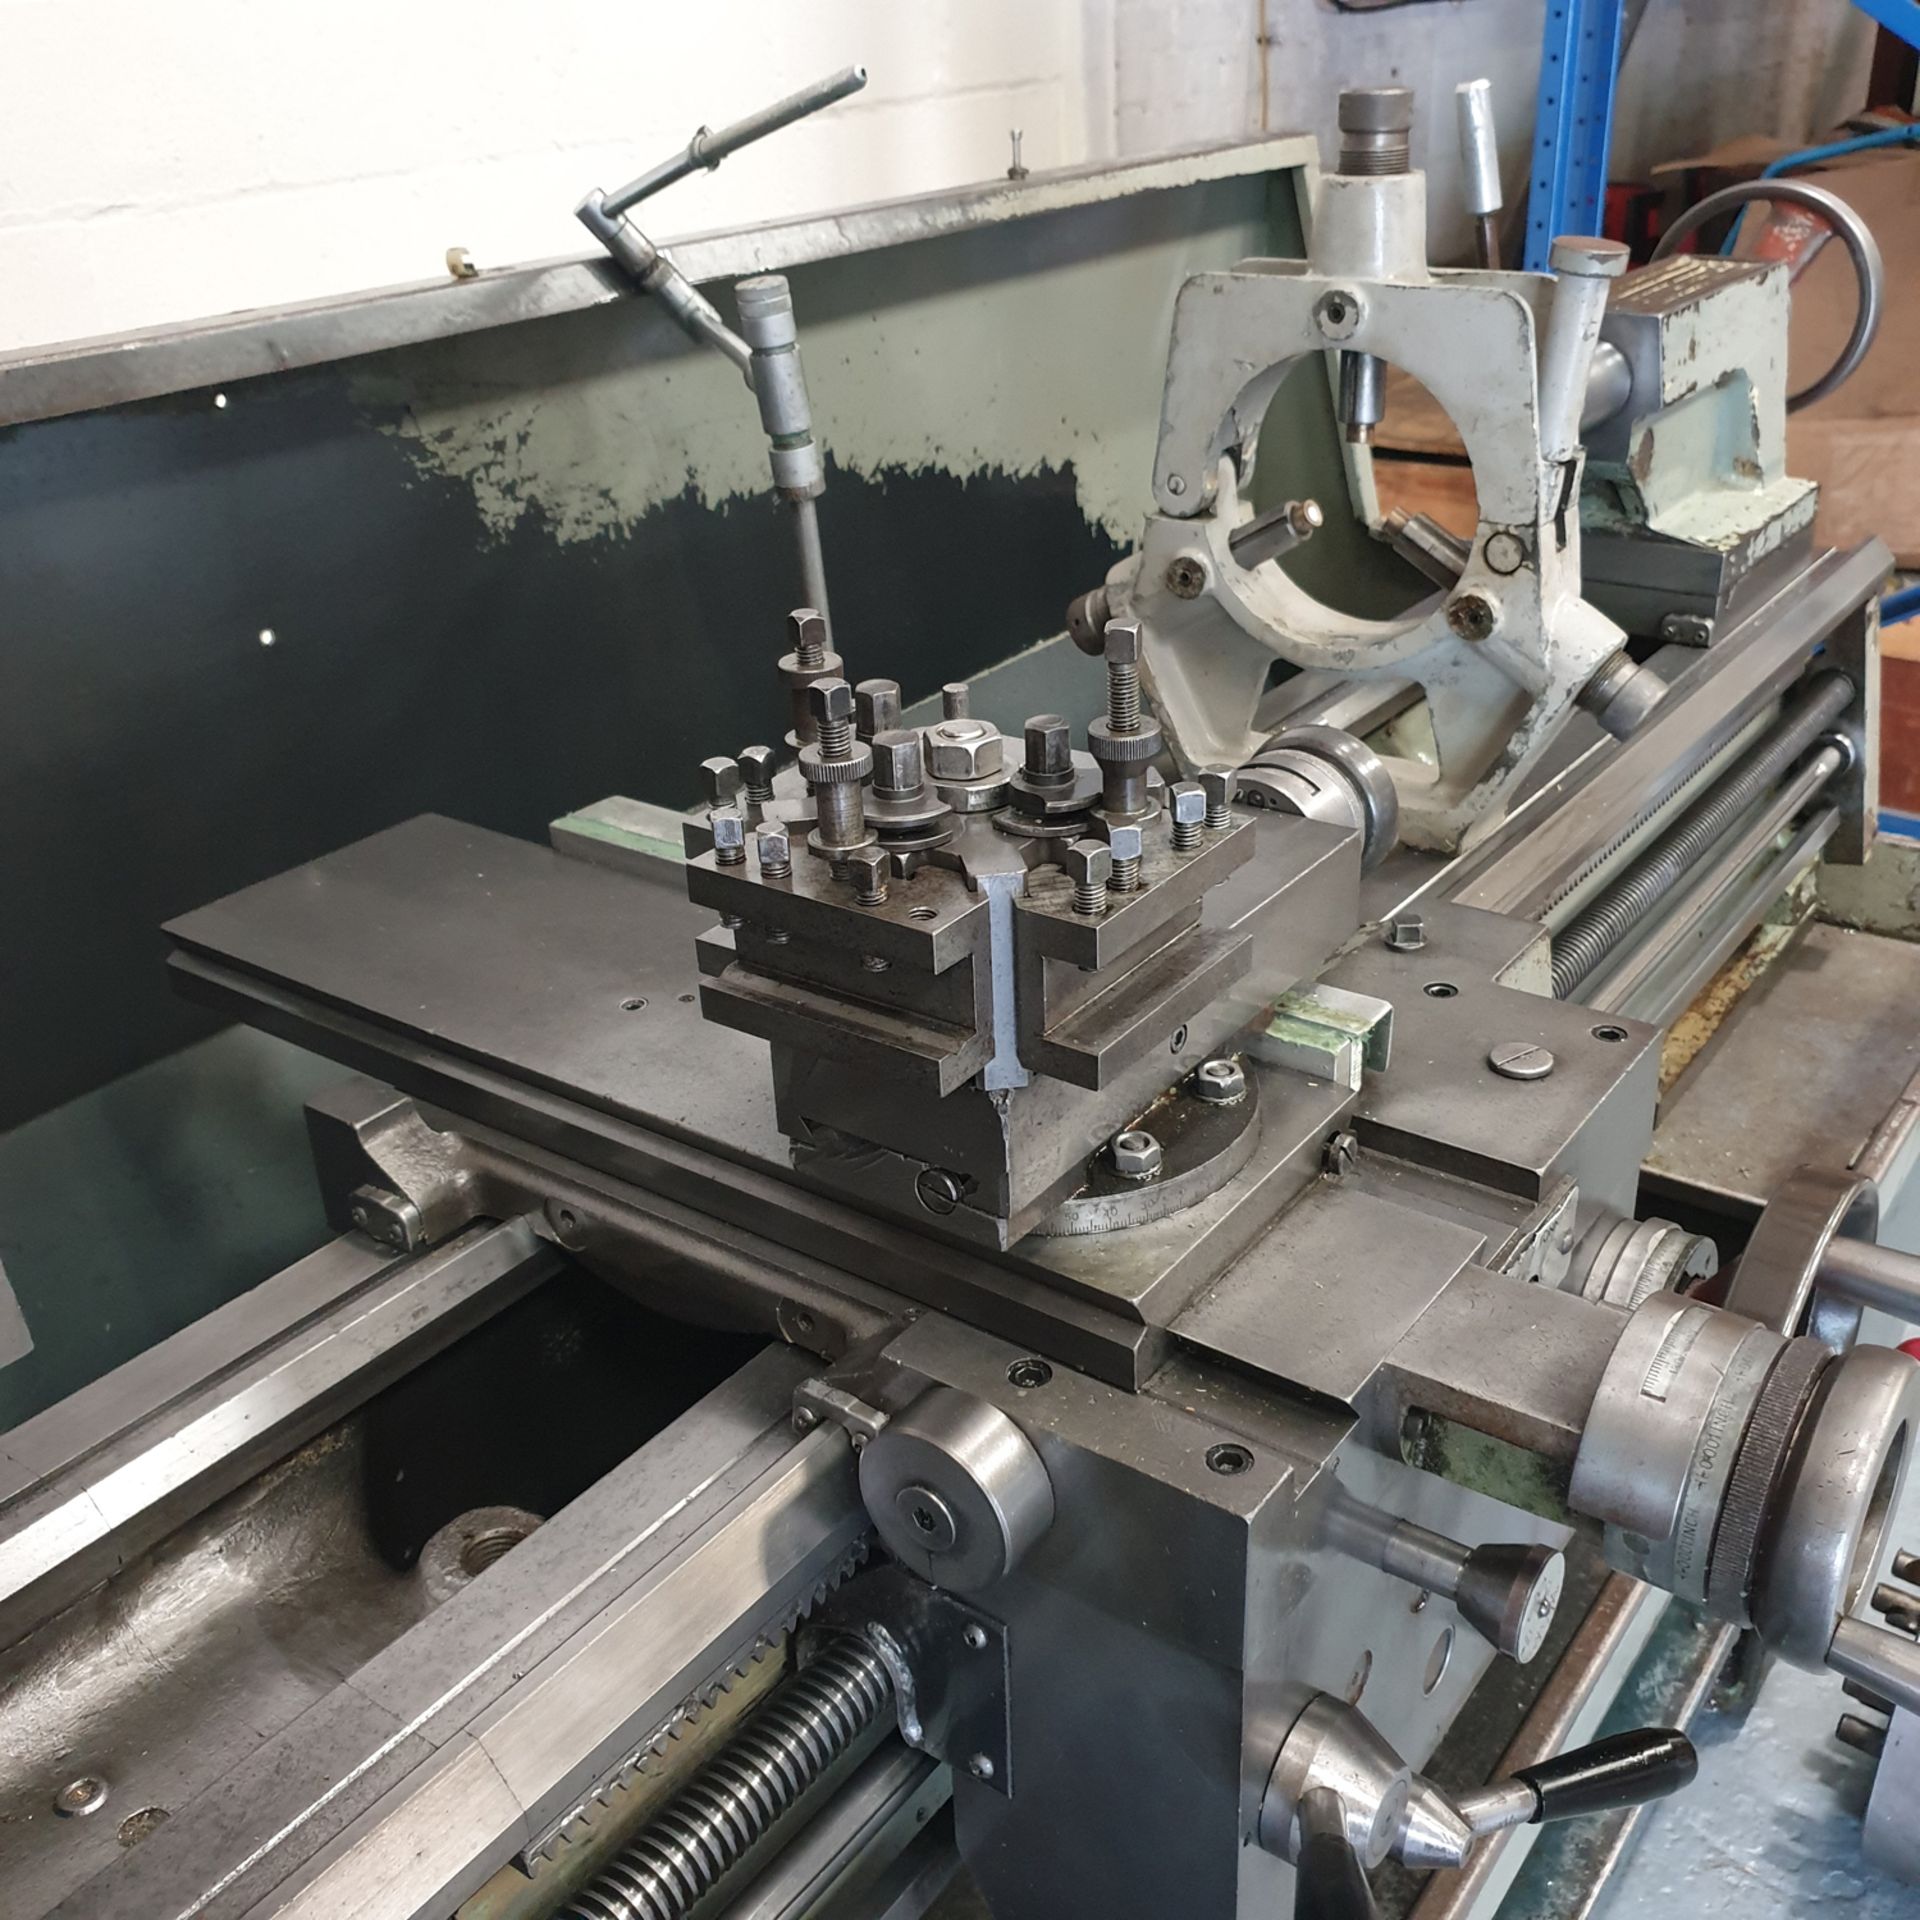 Colchester Triumph 2000 Gap Bed Toolroom Lathe. 50" Between Centres. 15" Swing Over Bed. - Image 3 of 12